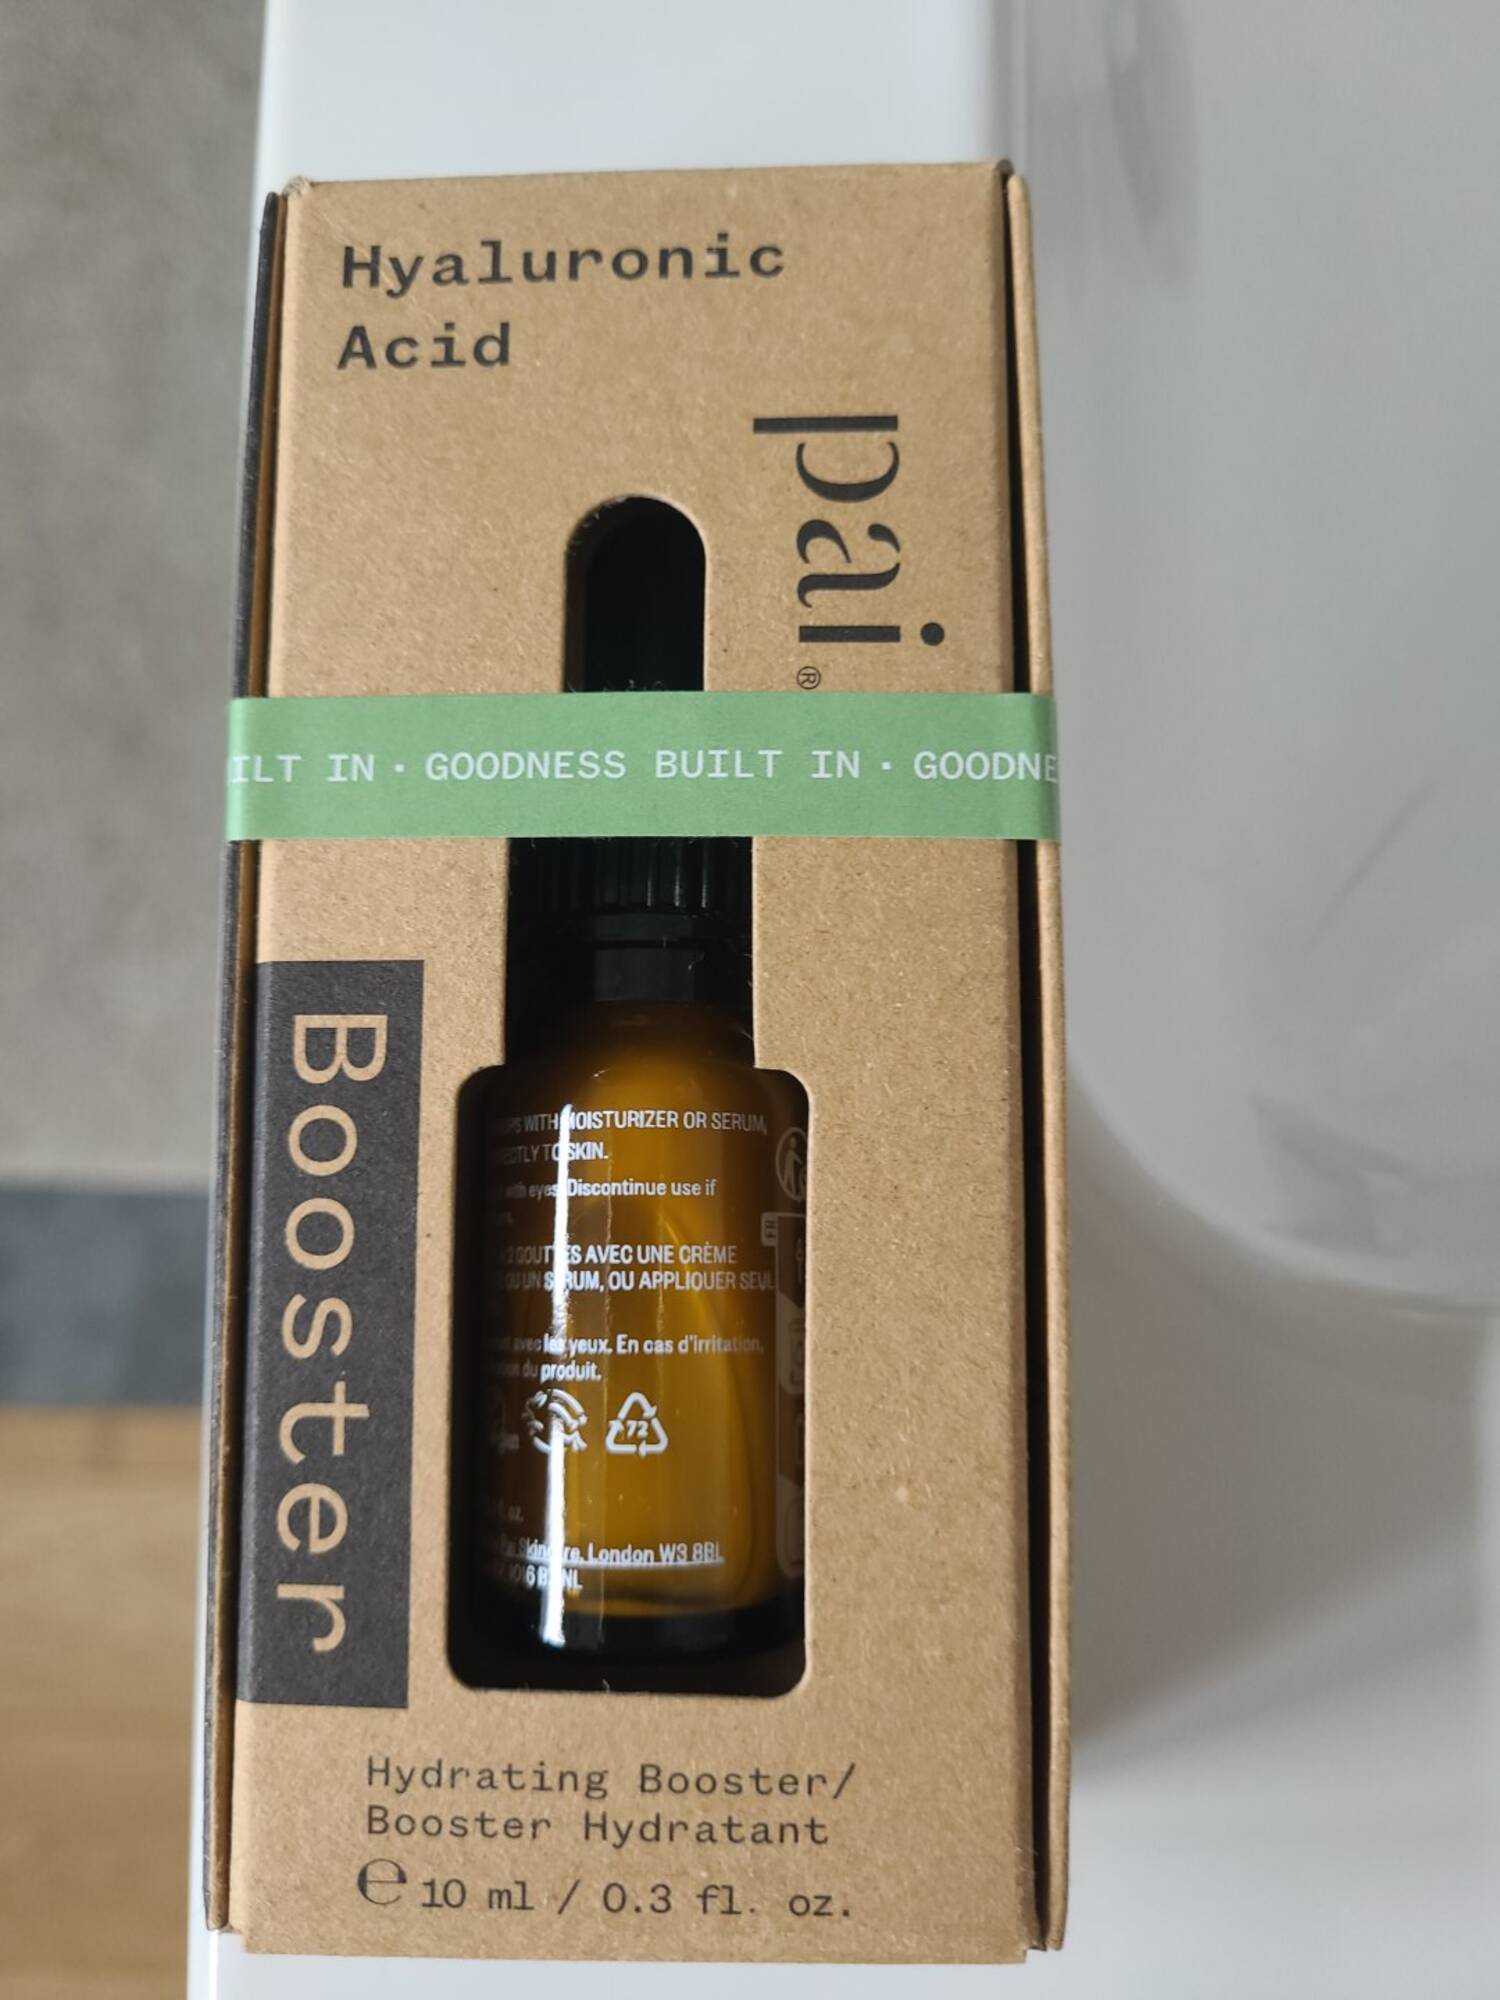 PAI - Booster hydratant hyaluronic acid